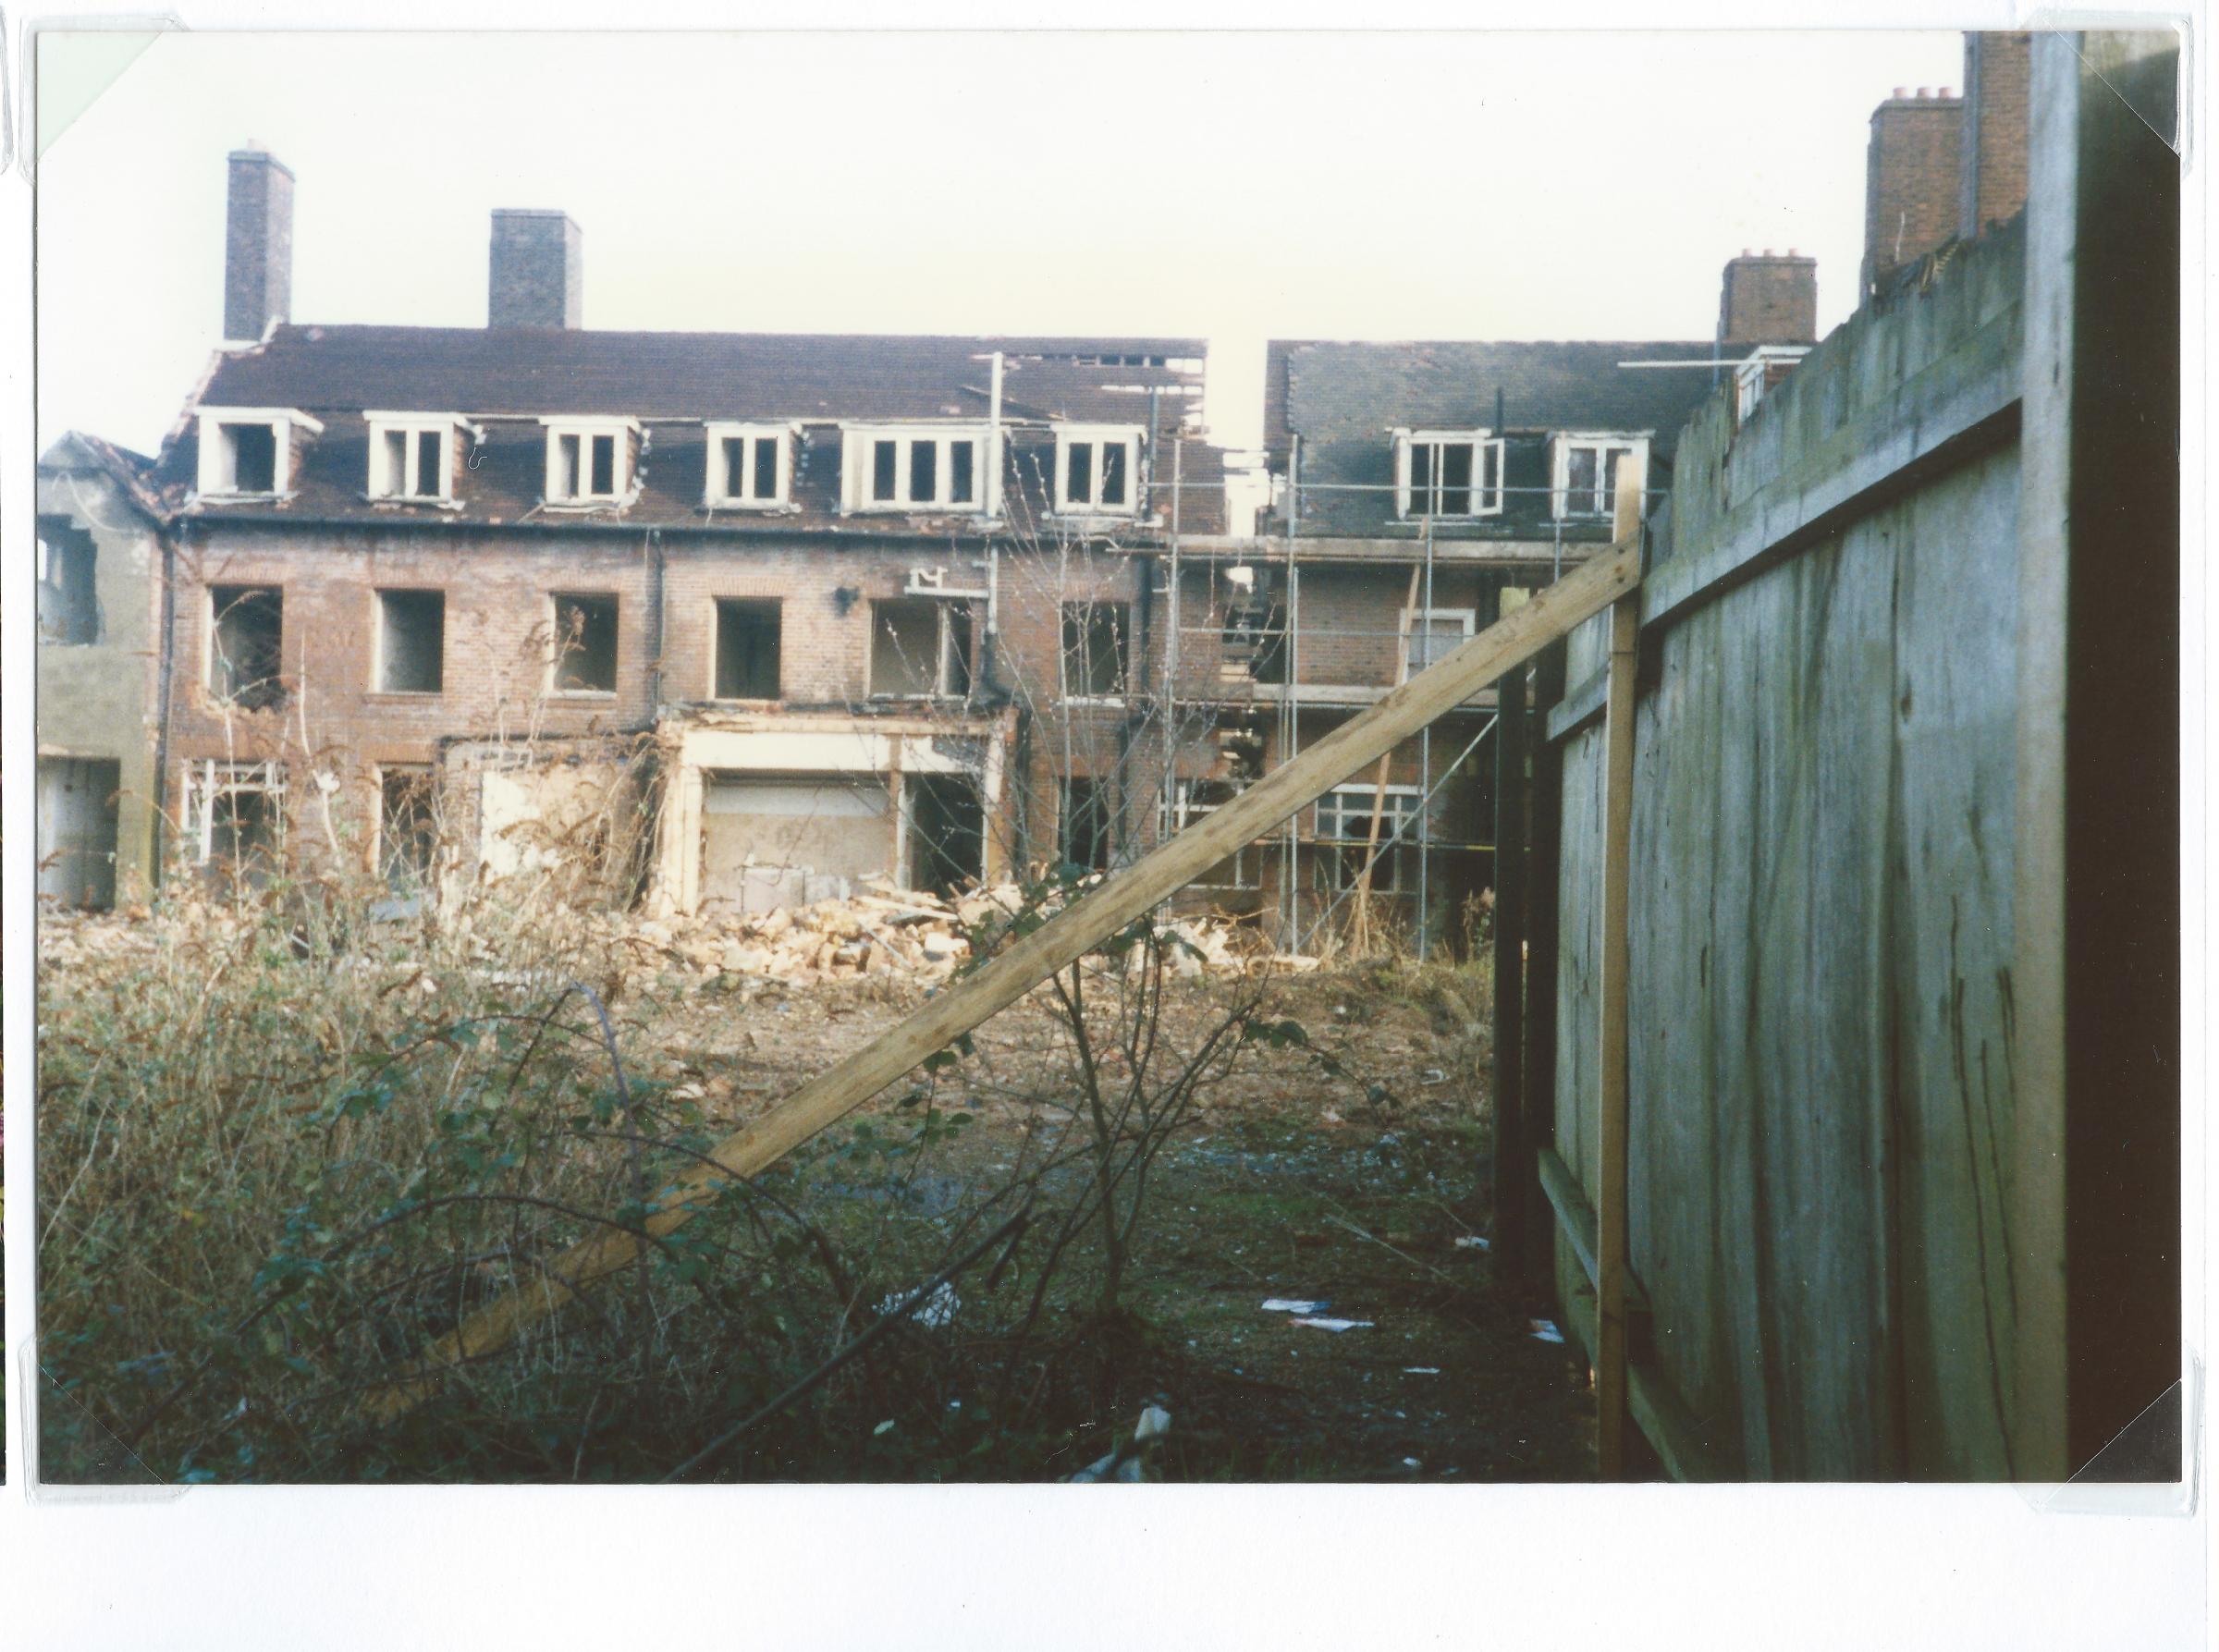 The derelict state of the old hospital before renovation